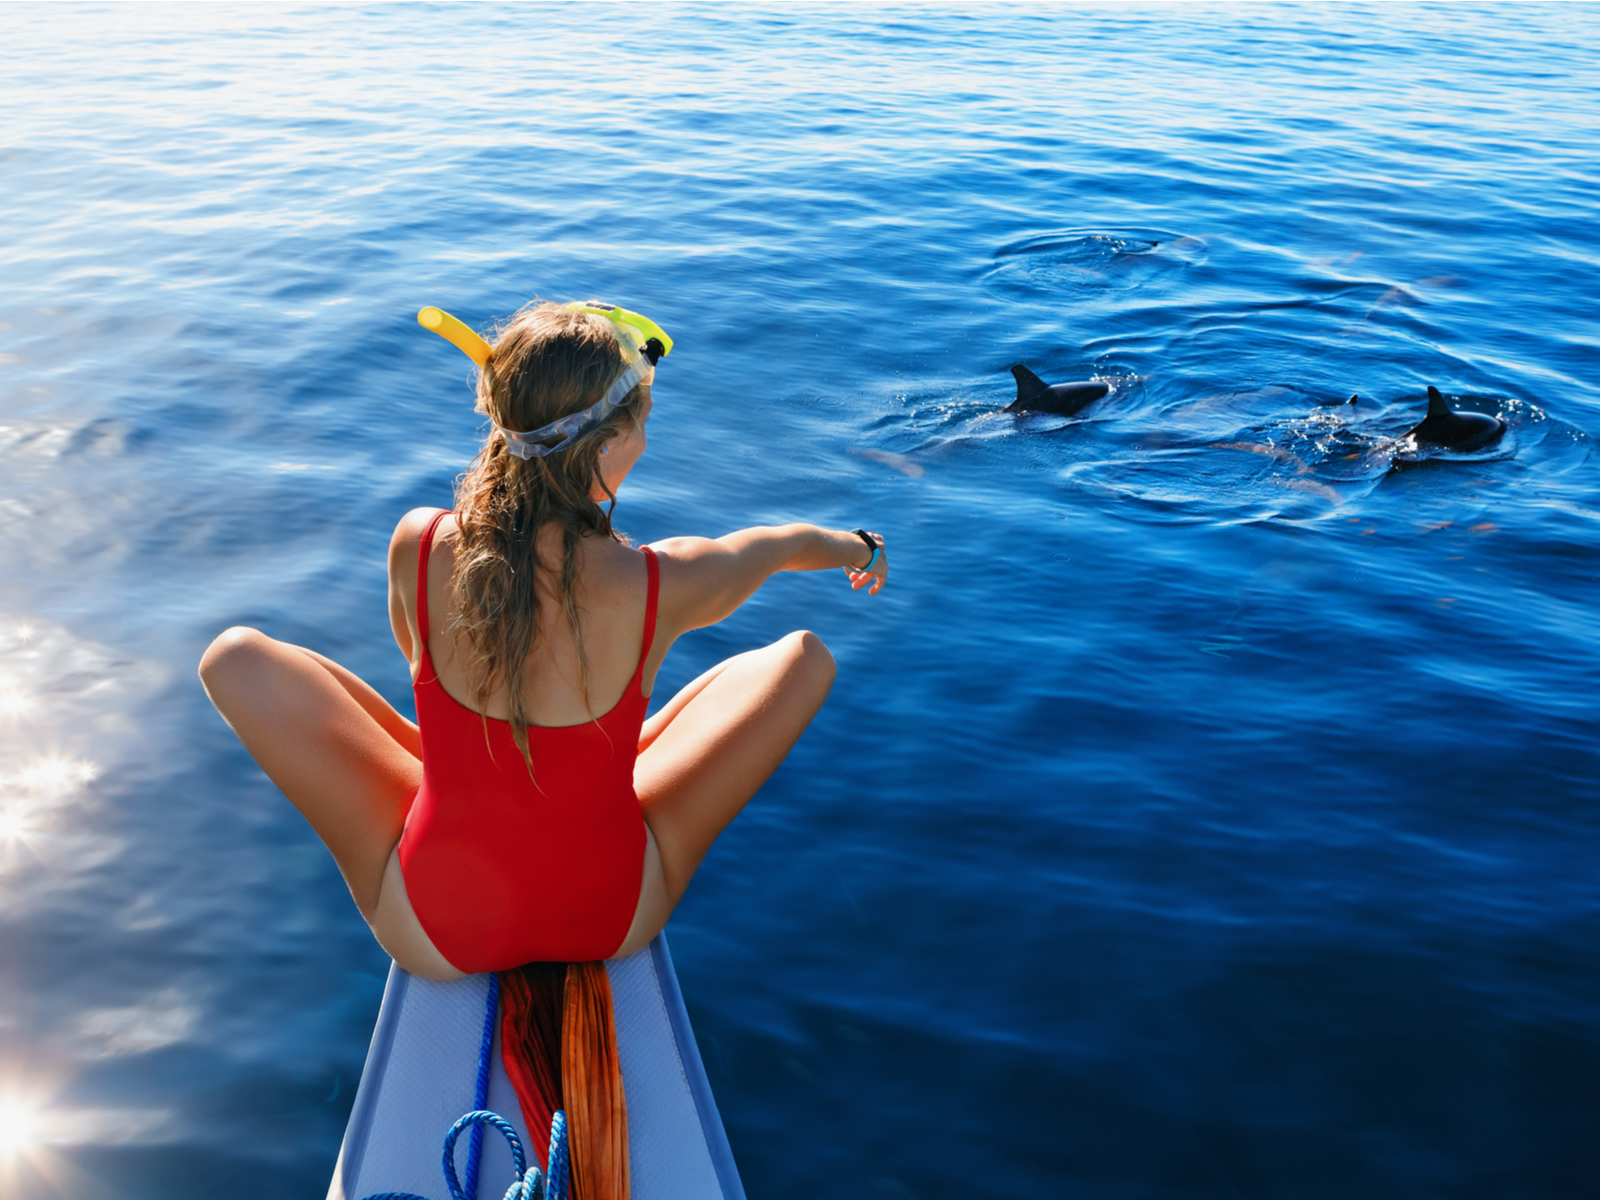 During the best time to visit Destin Florida, a woman in a red swimsuit sitting on a paddleboard looking at dolphins